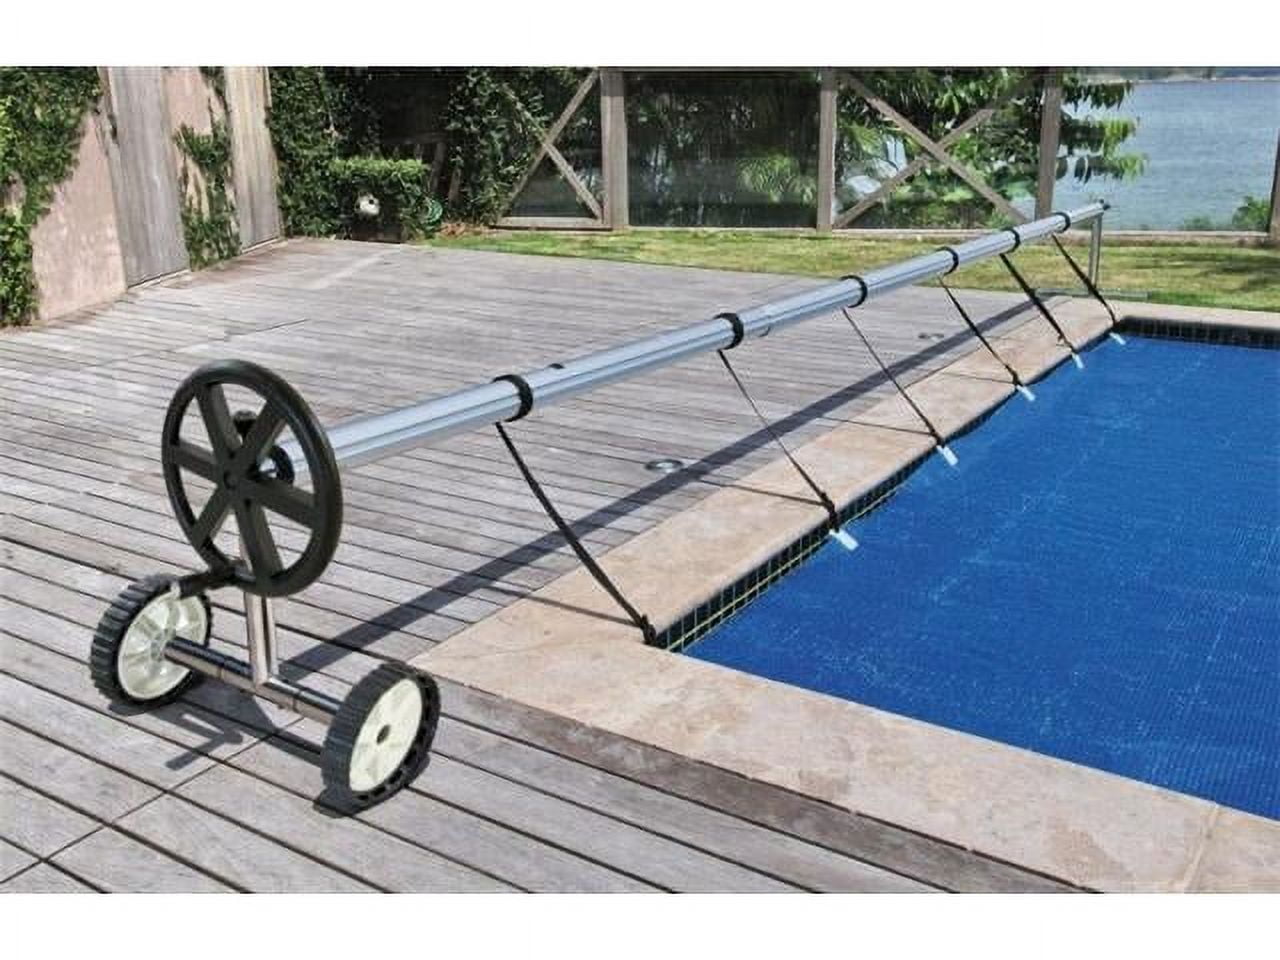 XtremepowerUS 21ft Inground Swimming Pool Reel Cover Tube, Stainless Steel,  with 3.25 Tube Set